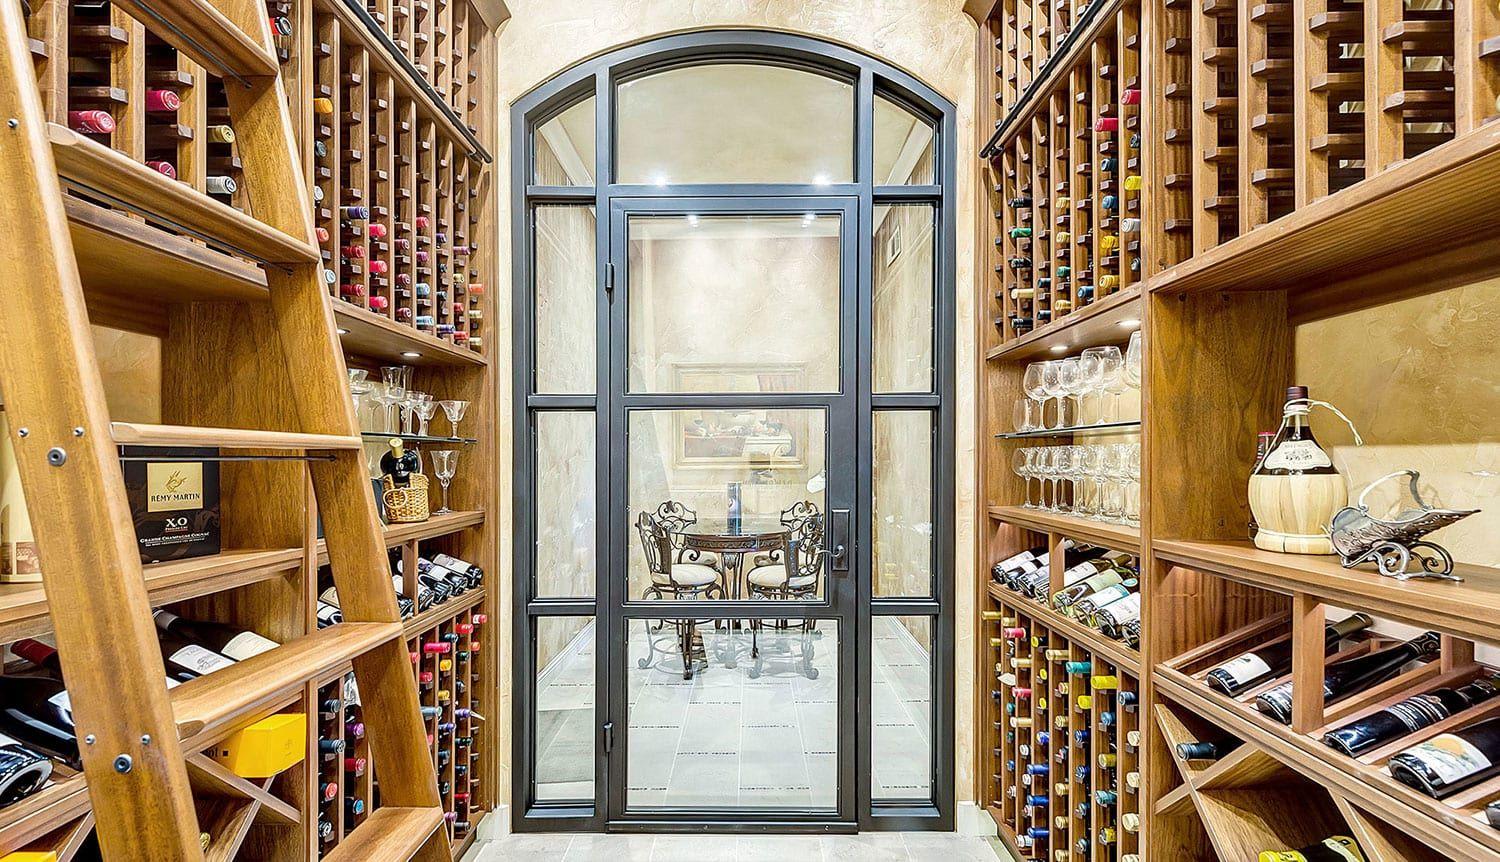 Stunning wood wine cellar custom made for a Texas home with a dramatic arched window and ladder.